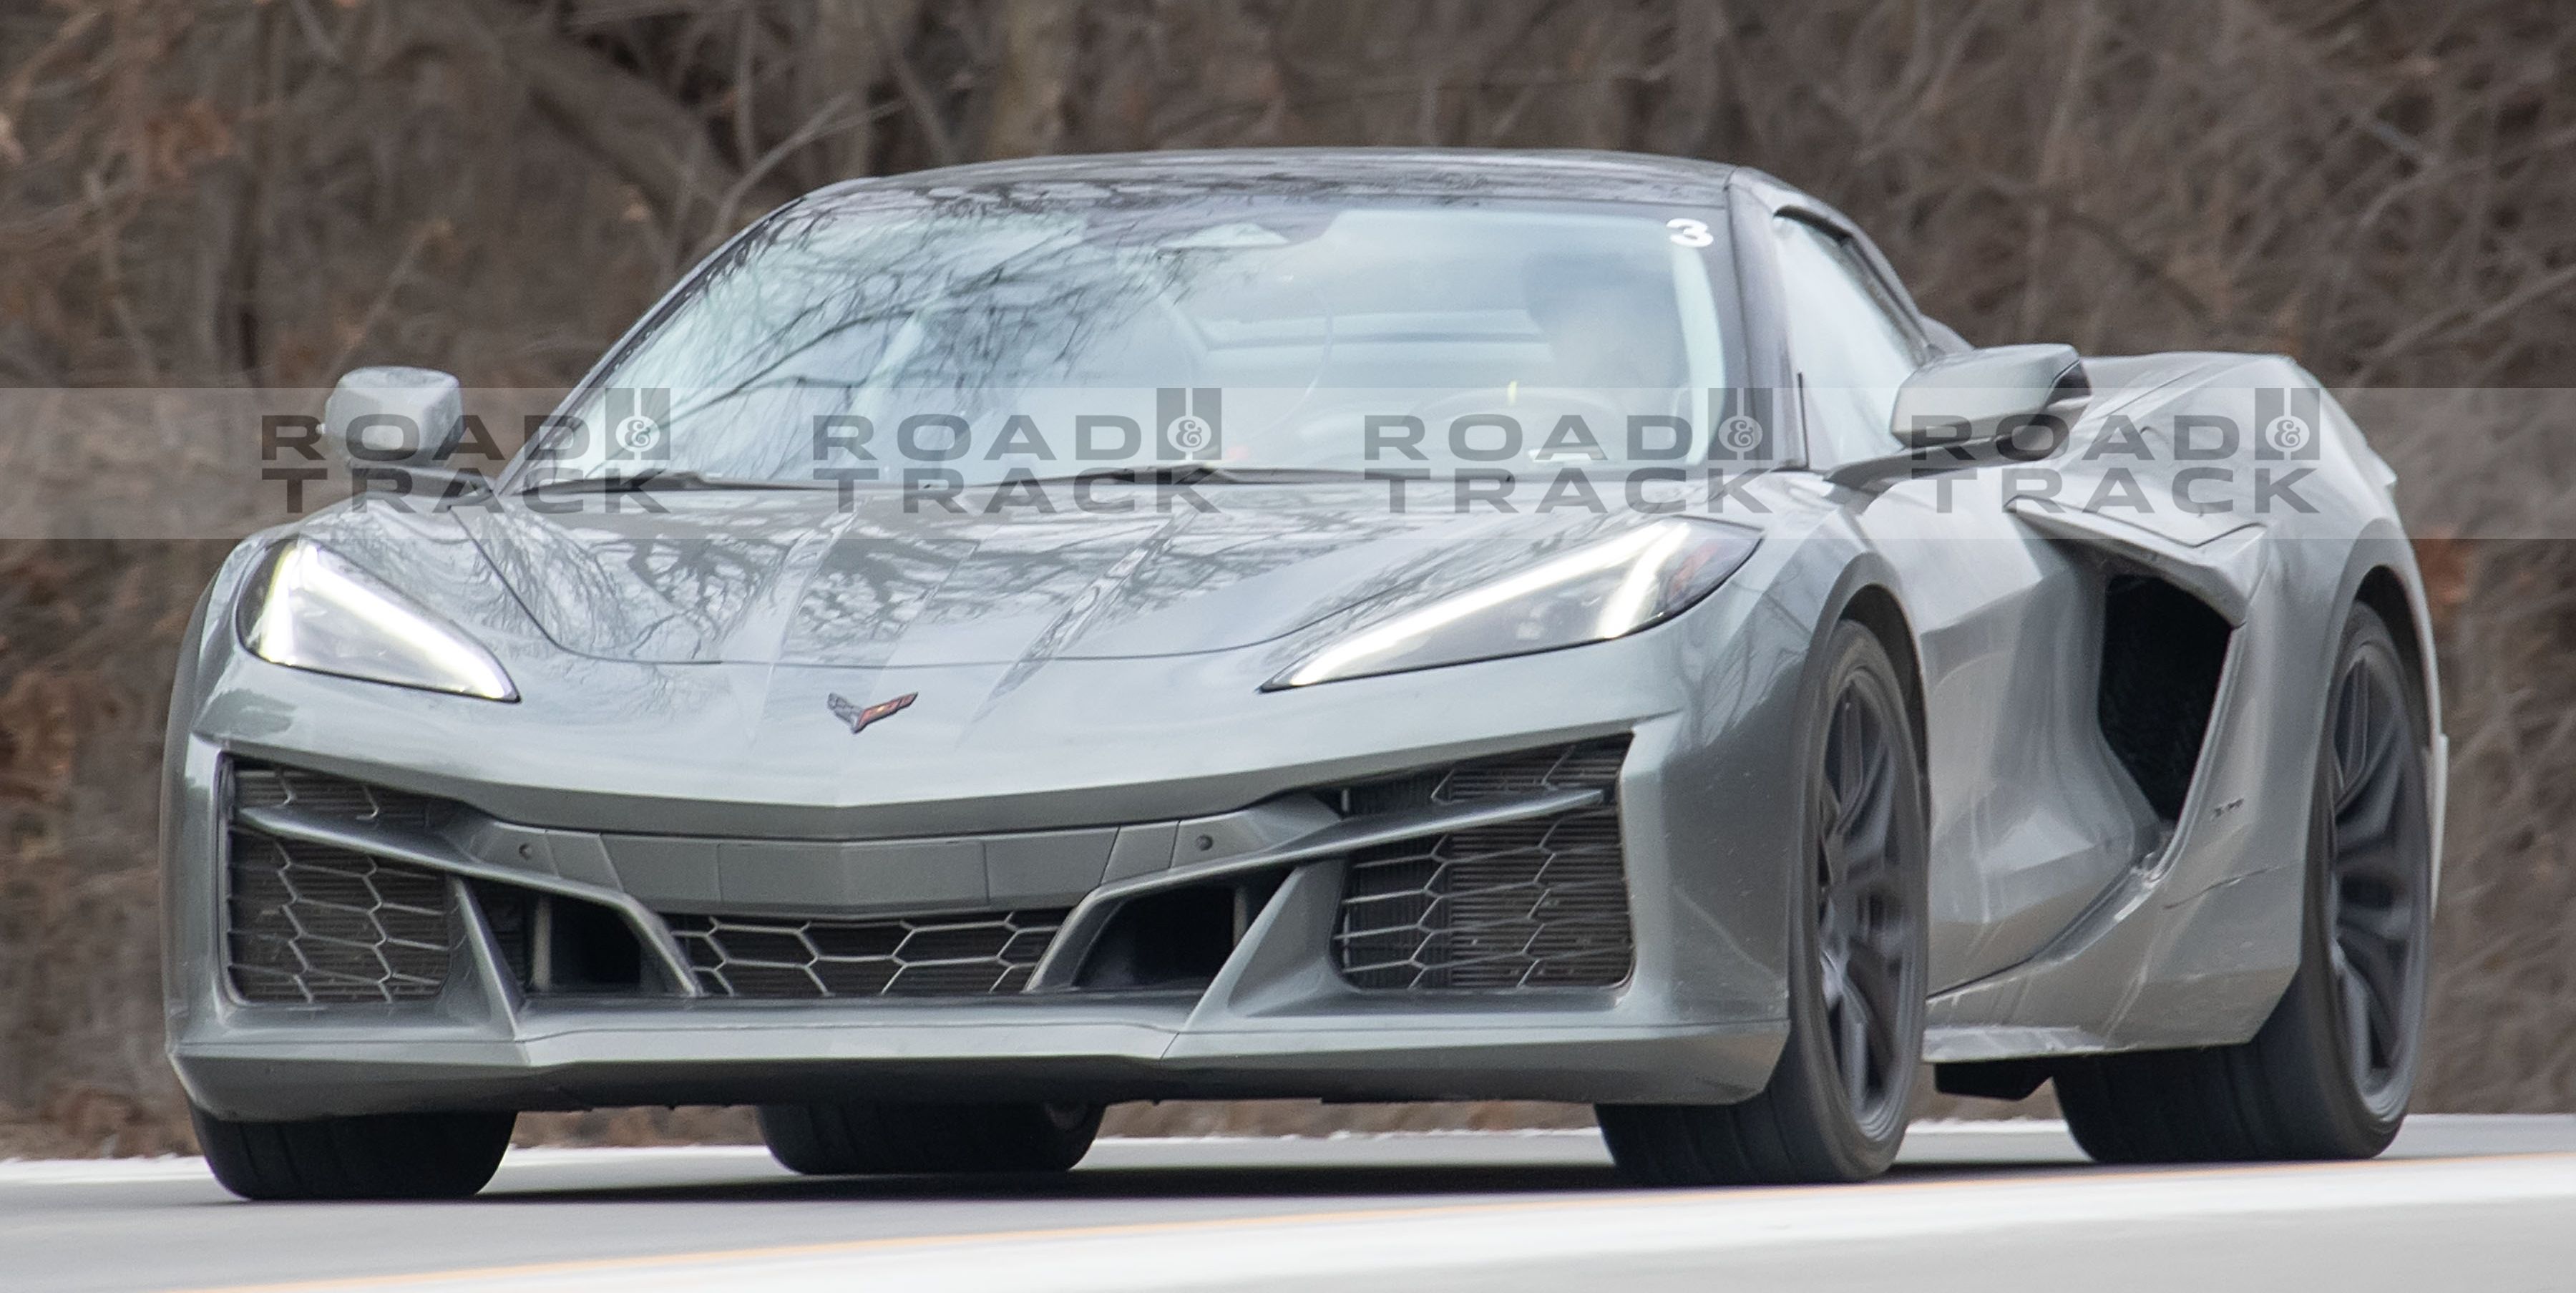 Corvette E-Ray Spotted Totally Undisguised Testing in the Open